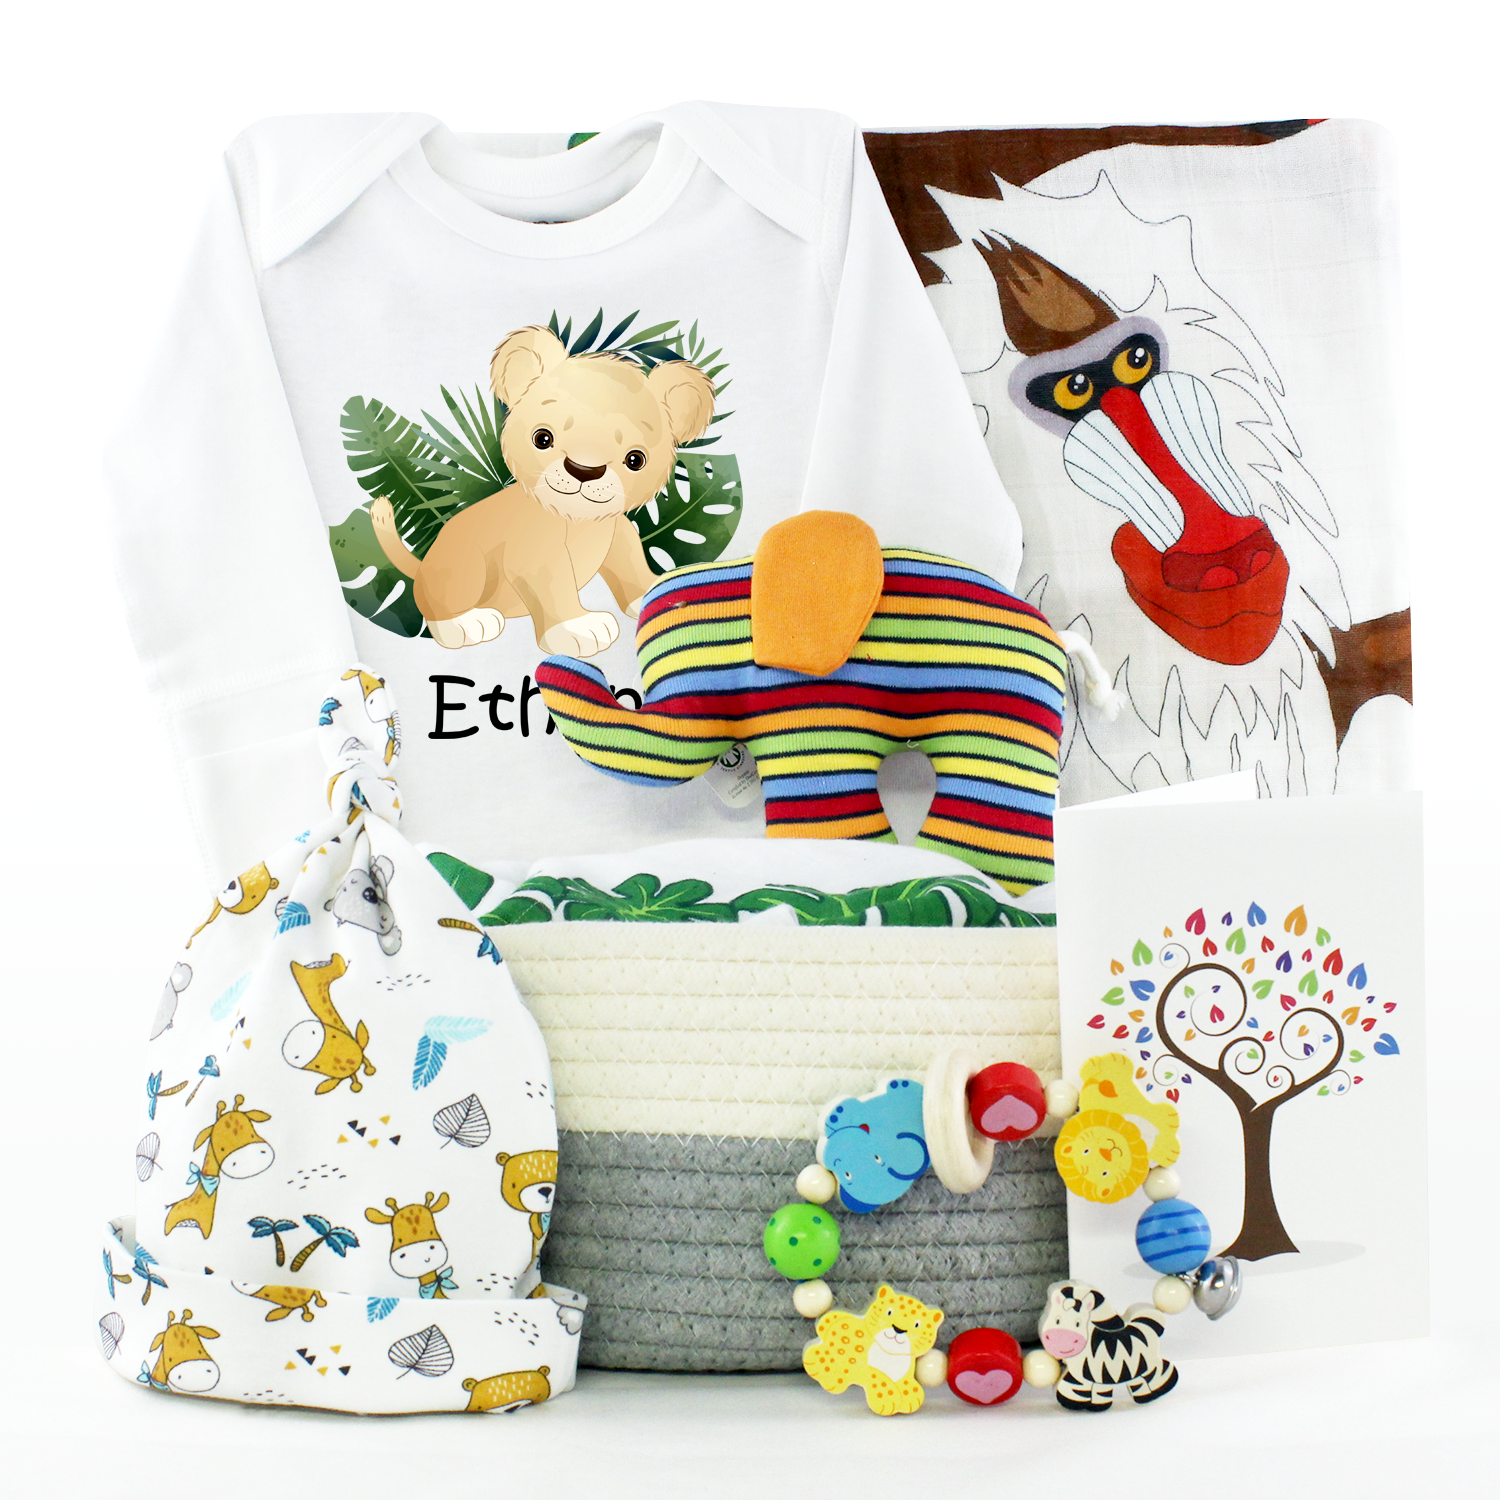 Zeronto Baby Gift Basket - King of the Crib and Jungle Friends